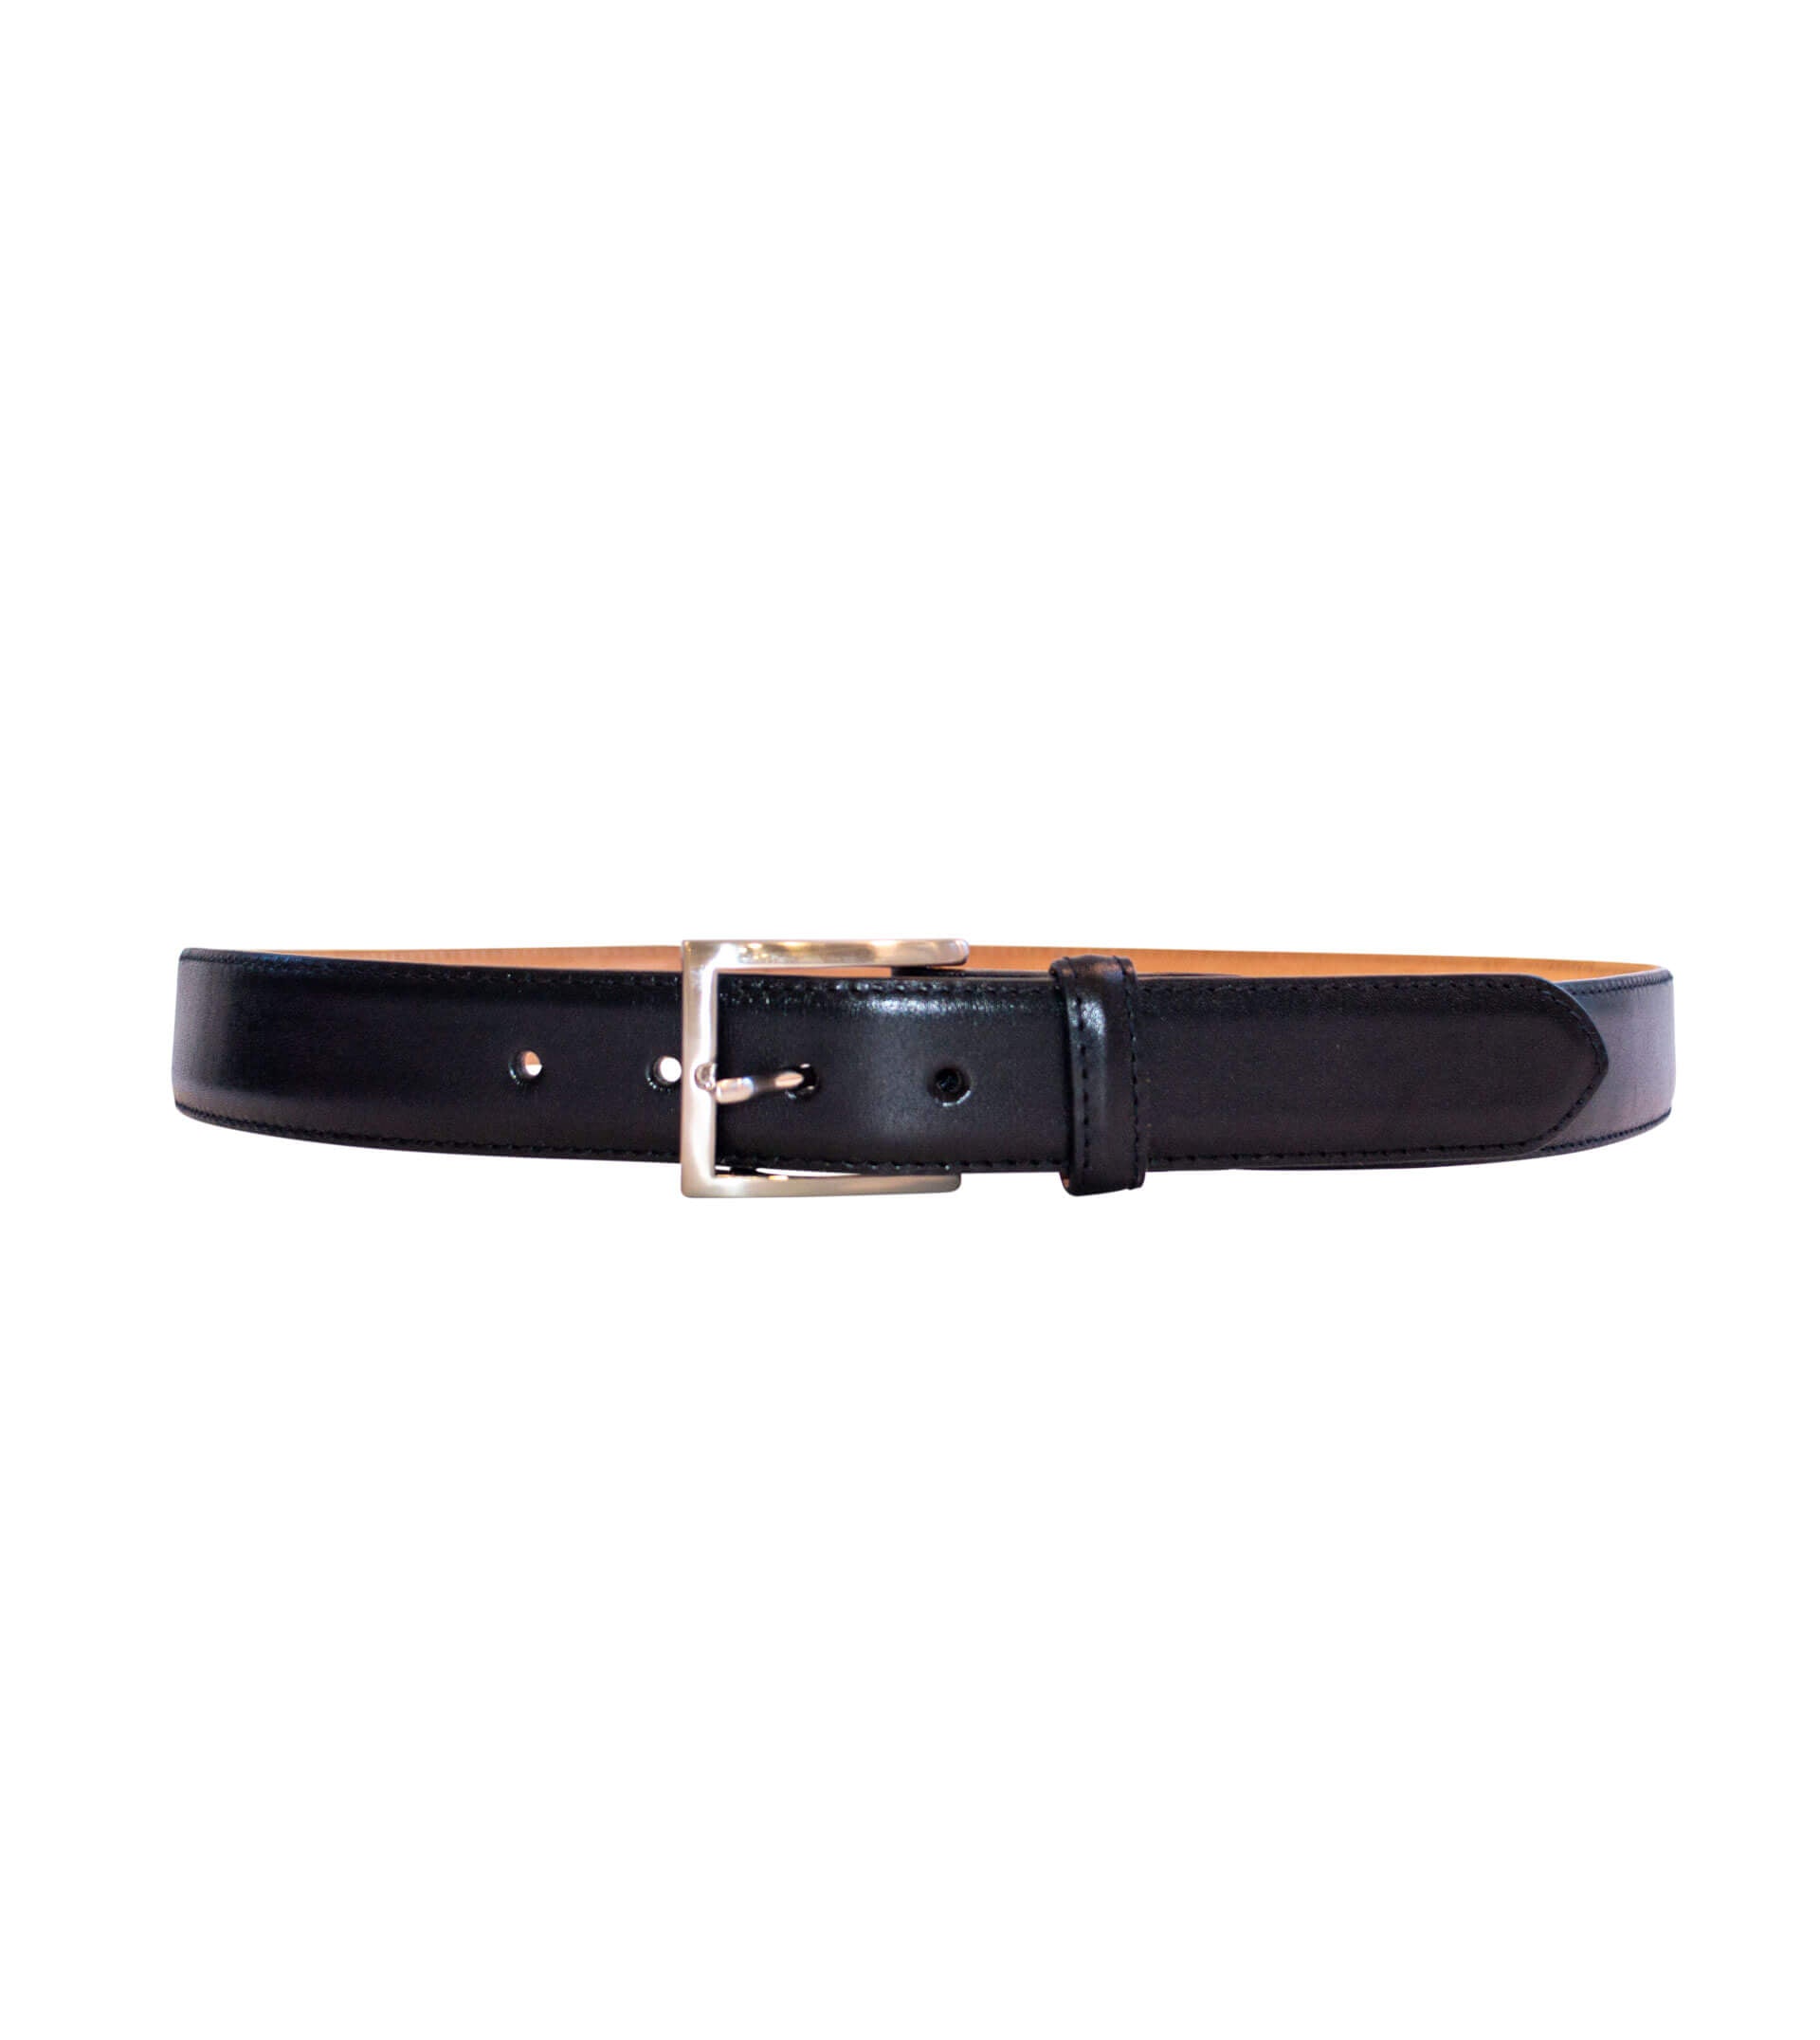 W. KLEINBERG  Monte Carlo Leather Belt +Colors